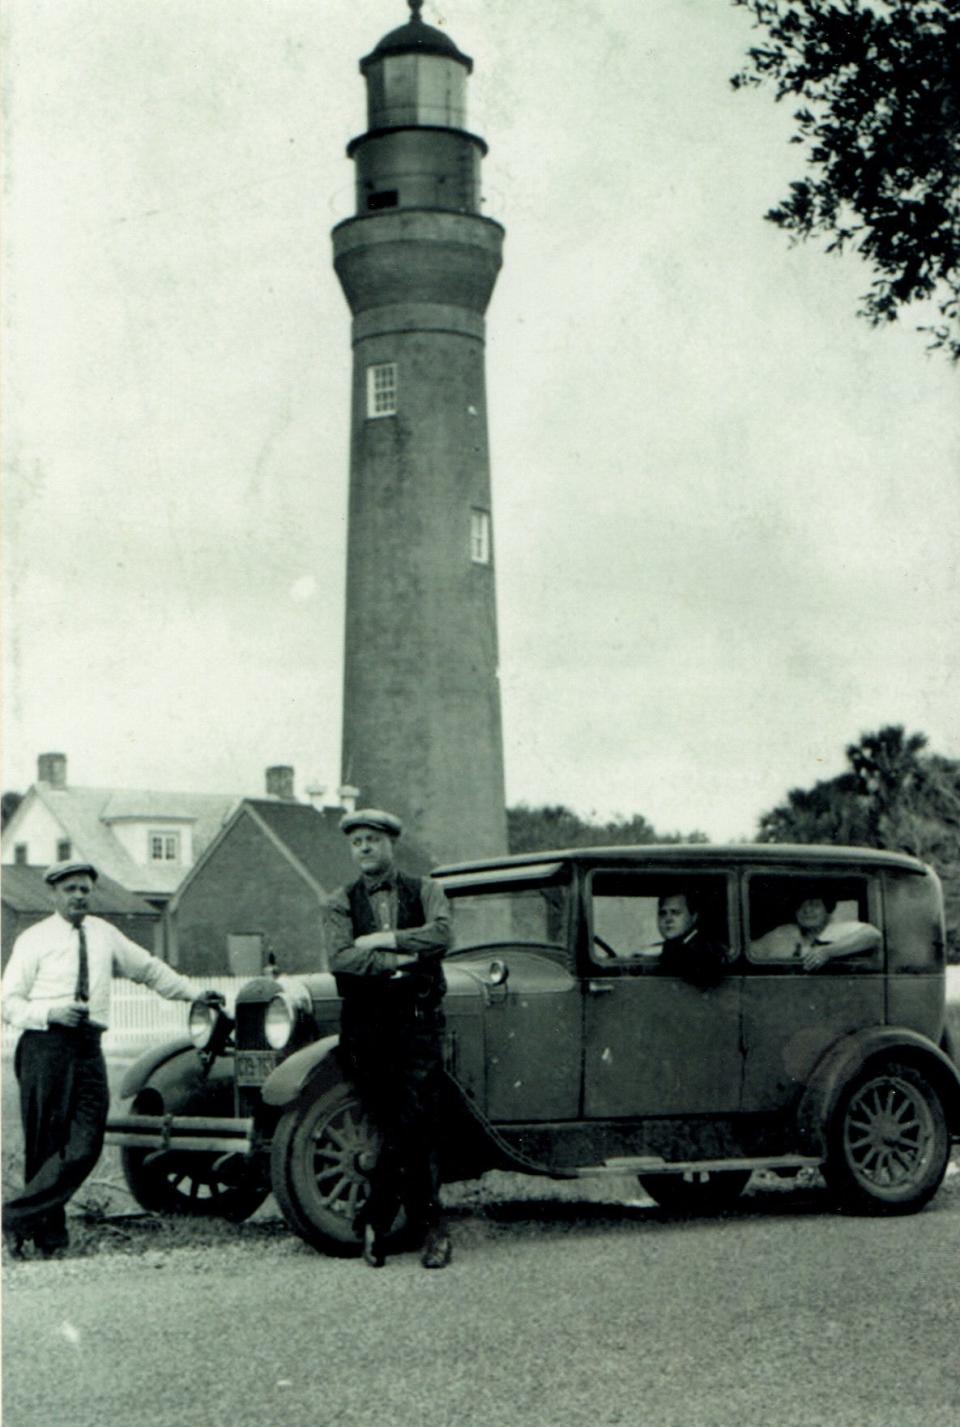 Mayport residents pose in front of the St. Johns River Lighthouse in this historic photo.